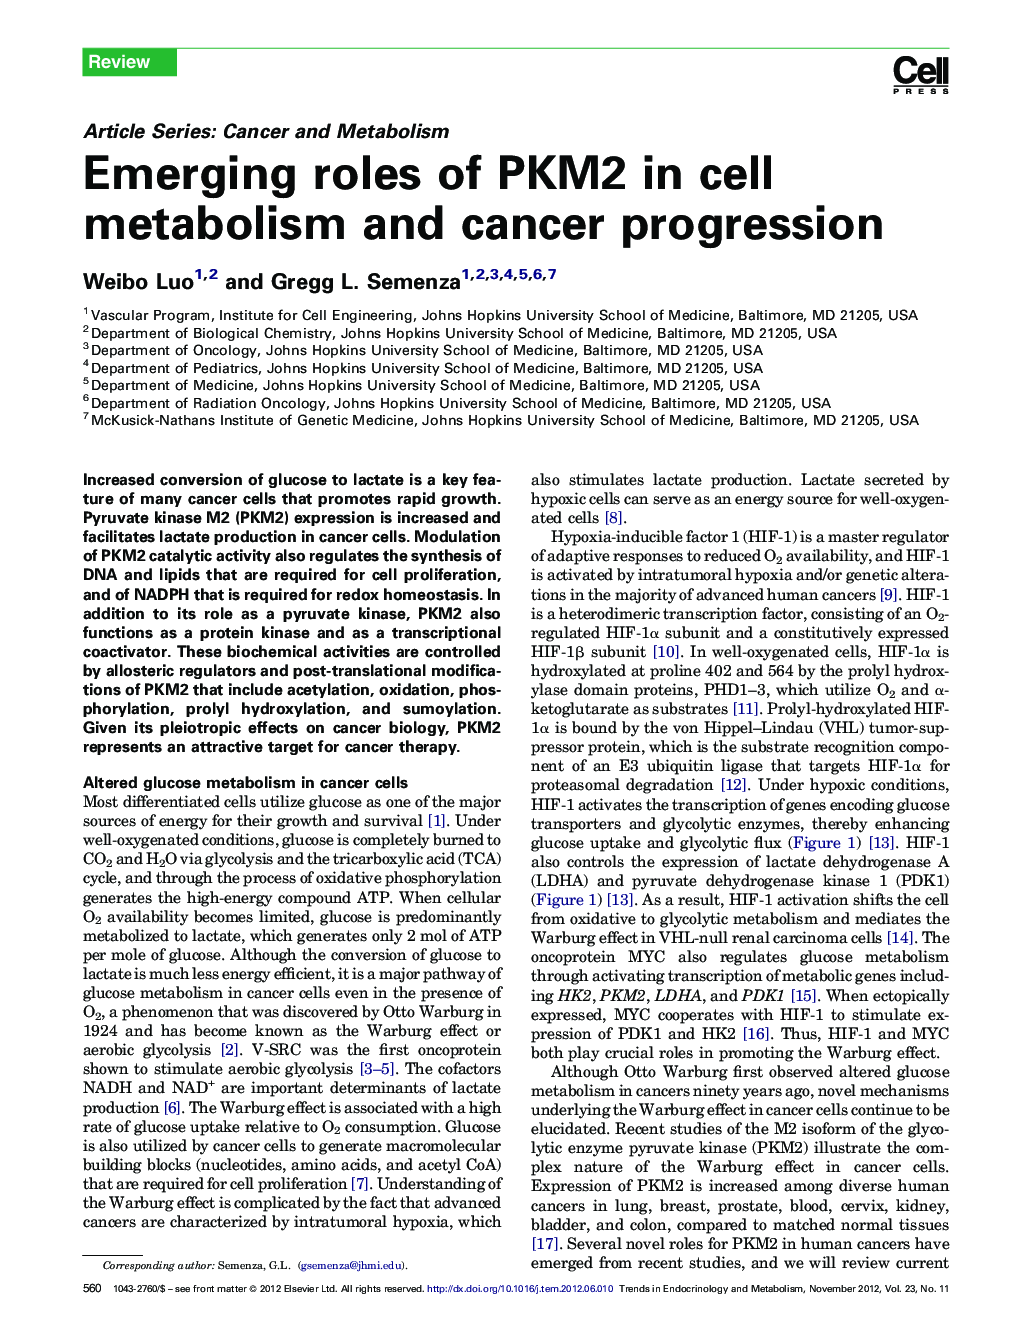 Emerging roles of PKM2 in cell metabolism and cancer progression